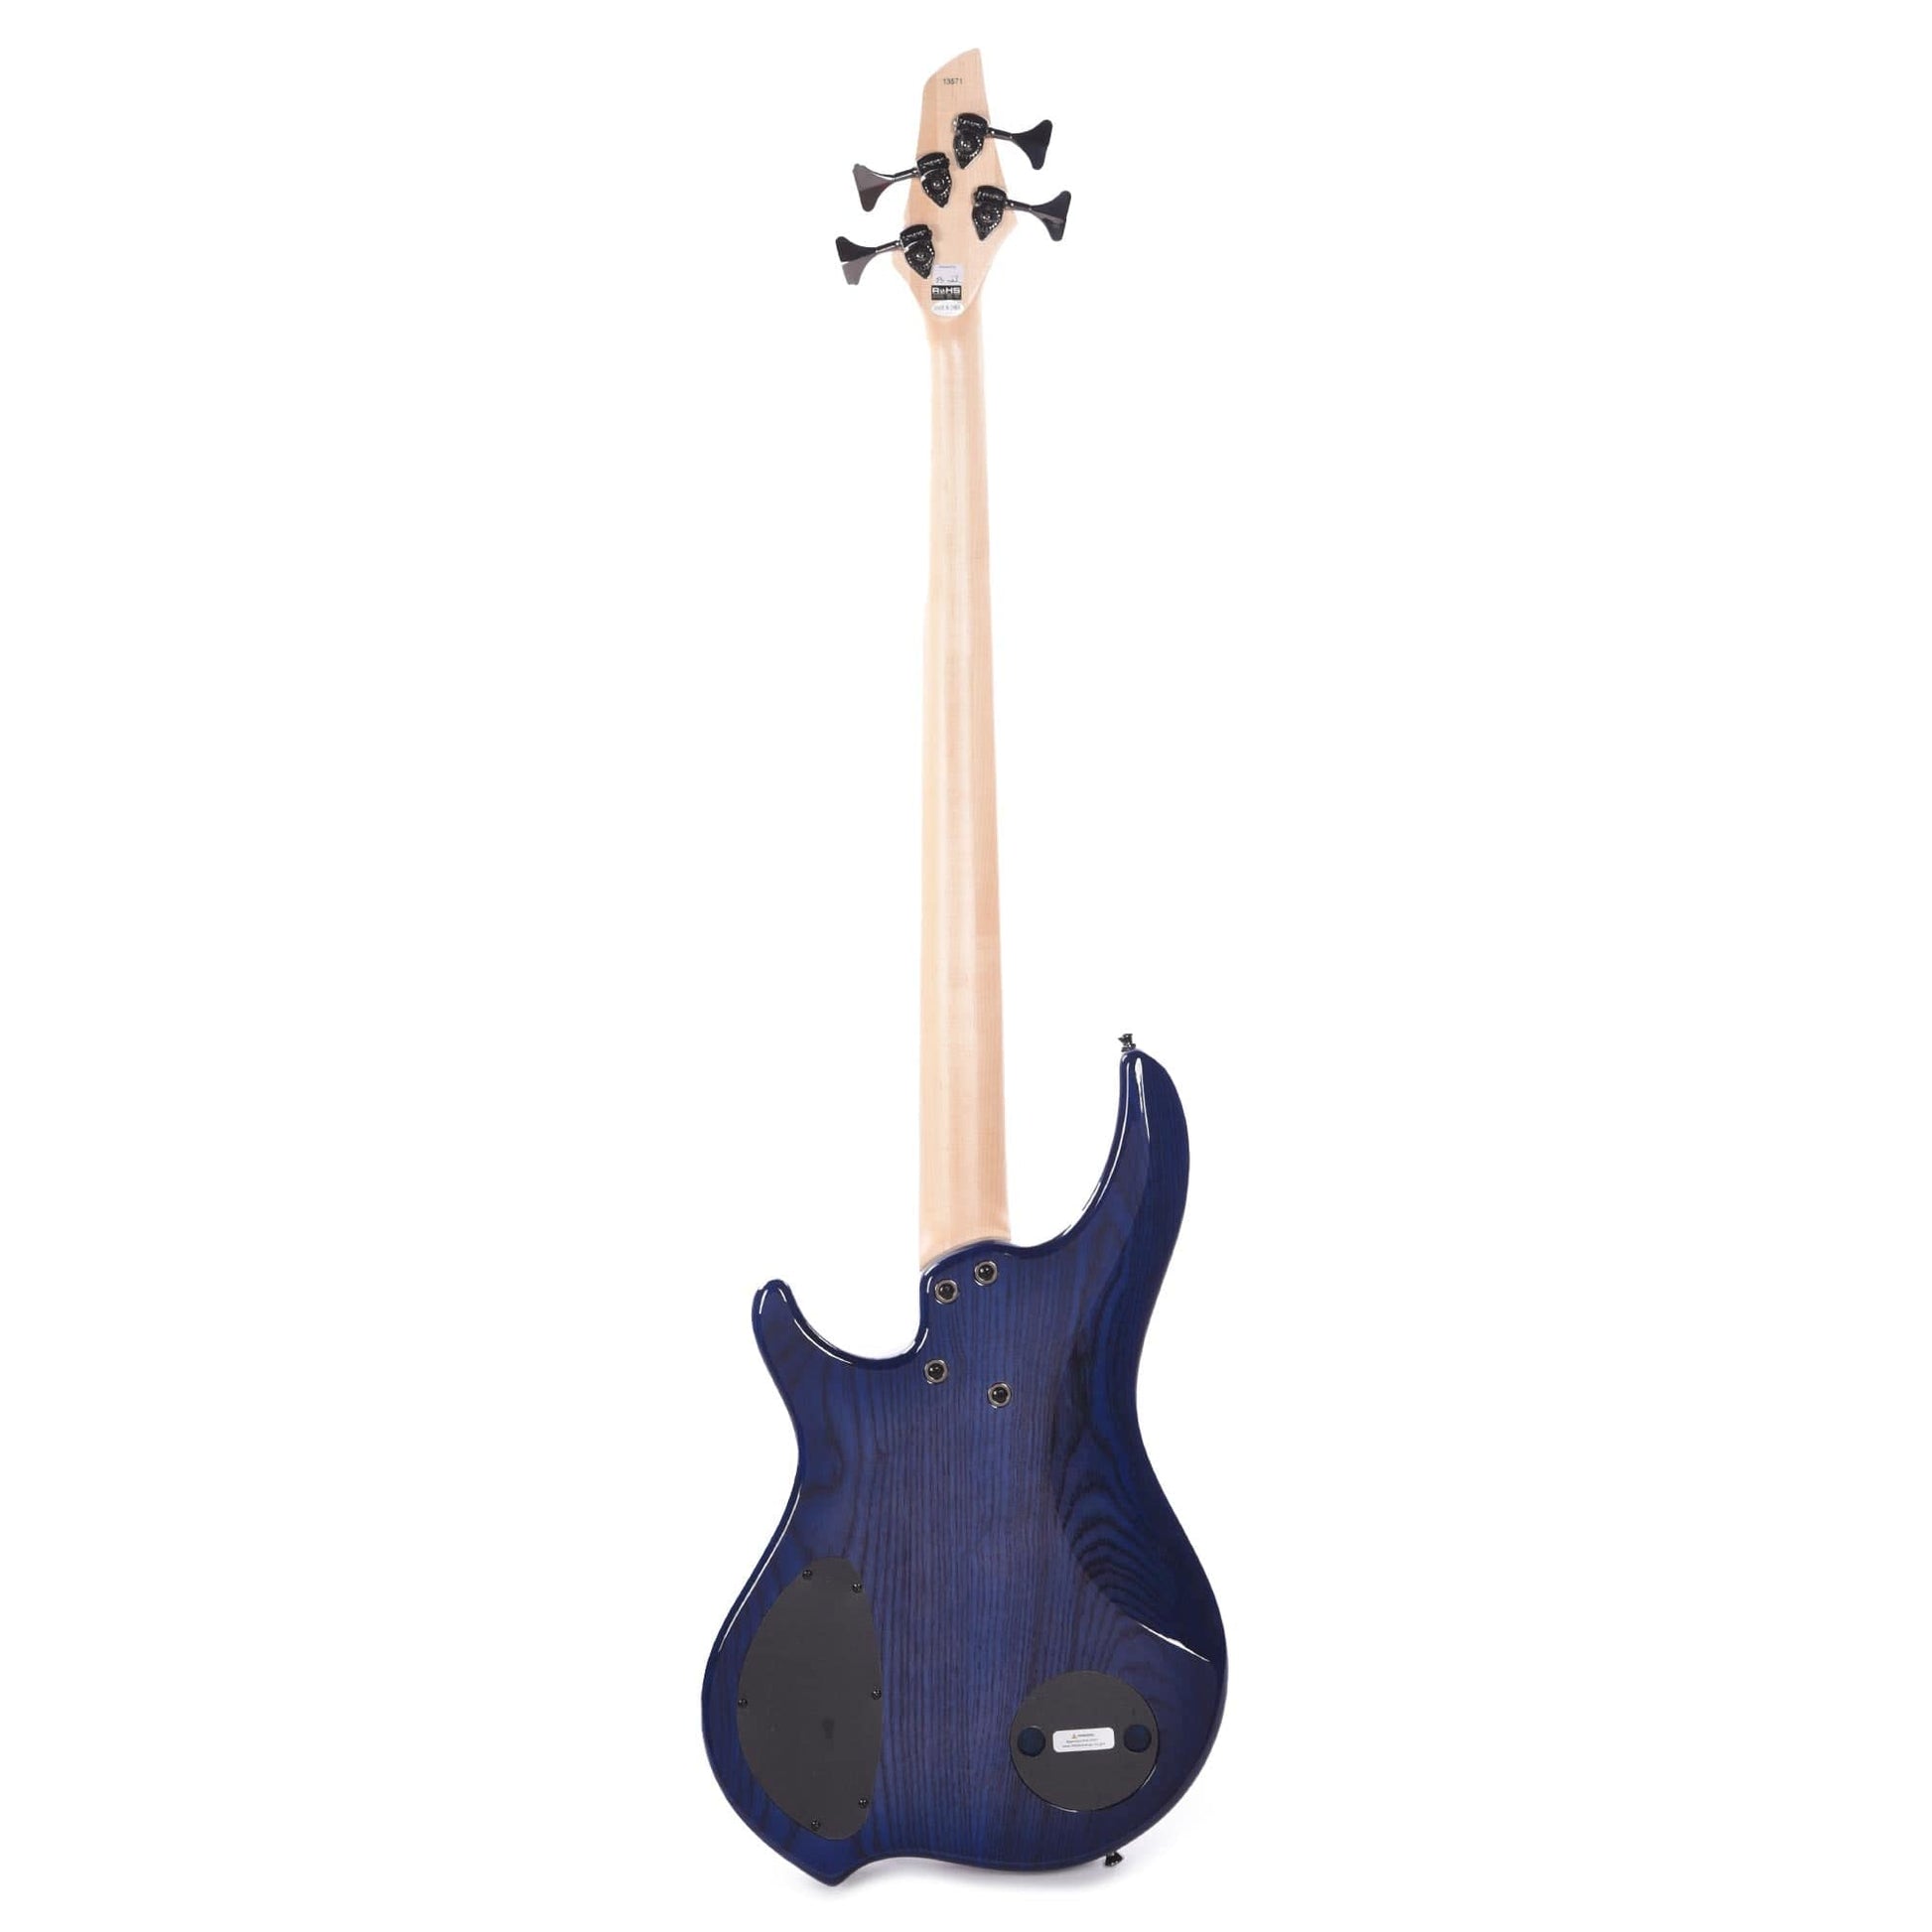 Dingwall Combustion Swamp Ash/Quilted Maple Indigo Burst Bass Guitars / 4-String